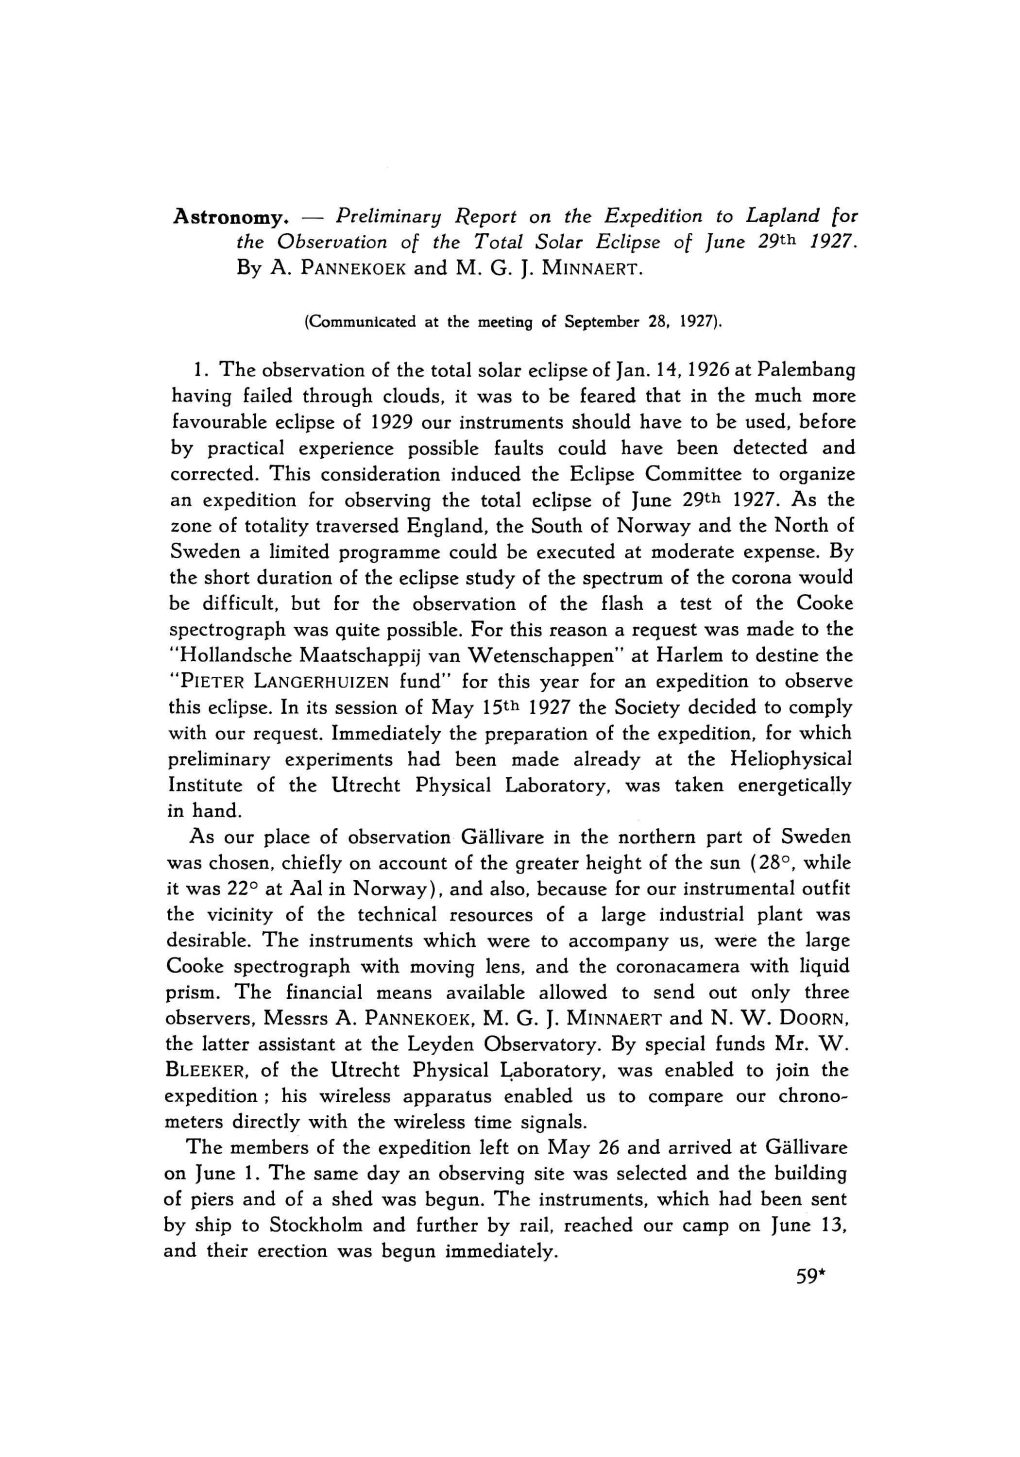 Preliminary Report on the Expedition to Lapland for the Observation of the Total Solar Eclipse of 29 June 1927